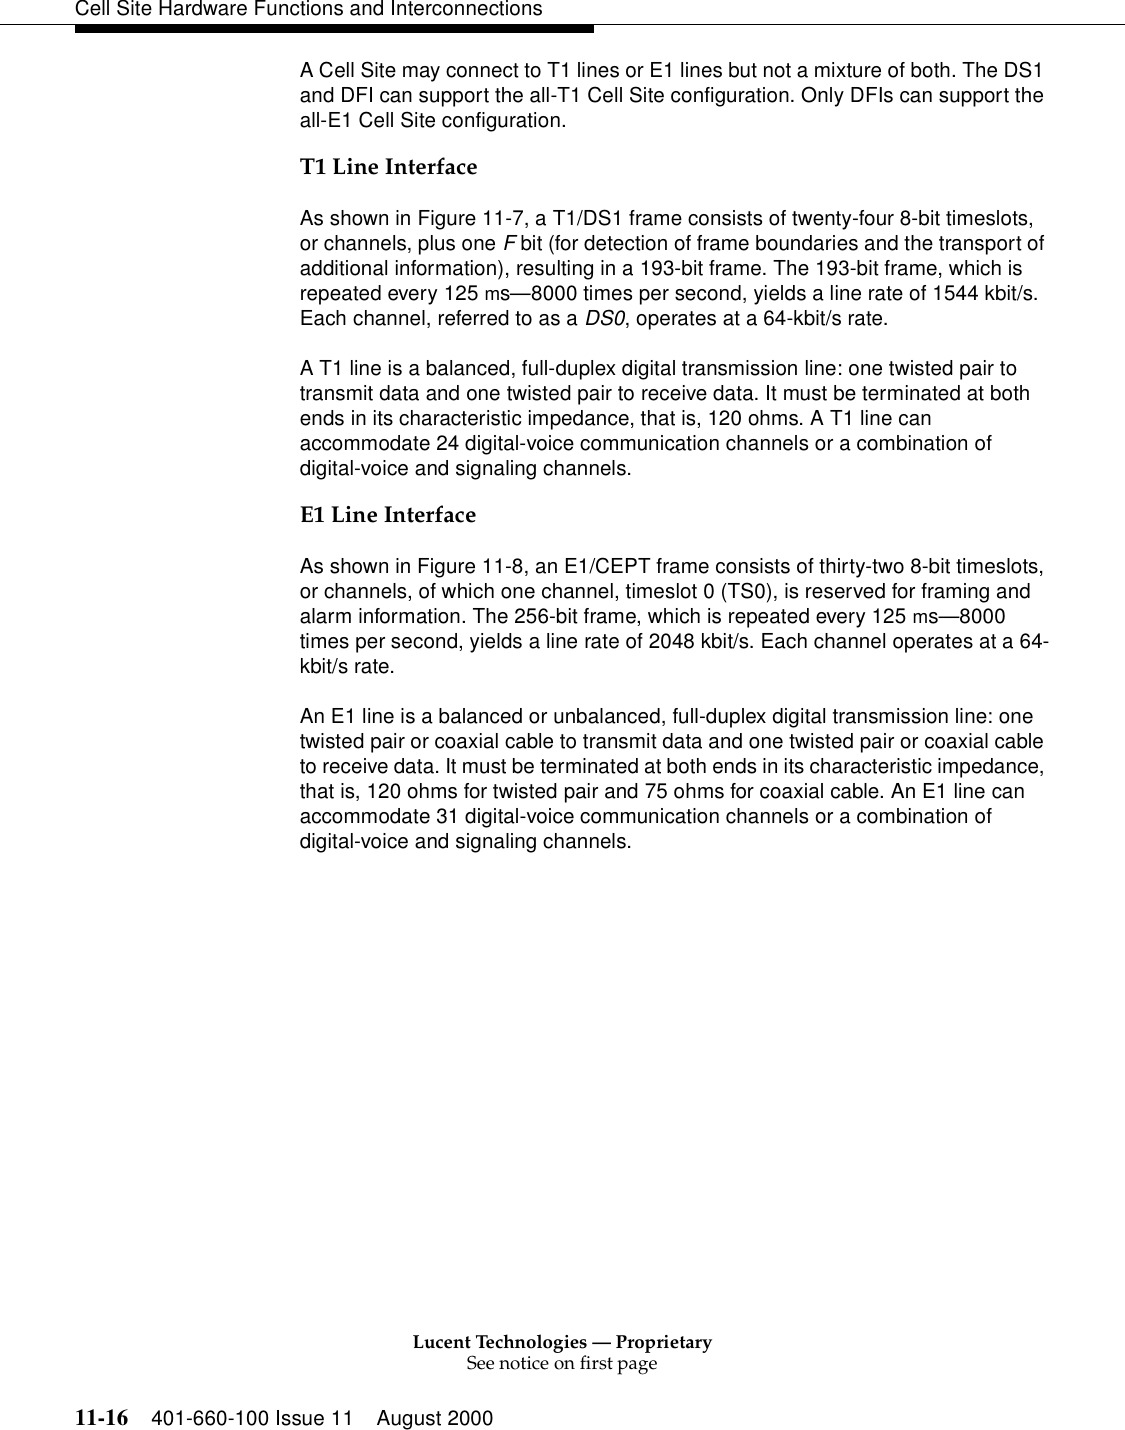 Lucent Technologies — ProprietarySee notice on first page11-16 401-660-100 Issue 11 August 2000Cell Site Hardware Functions and InterconnectionsA Cell Site may connect to T1 lines or E1 lines but not a mixture of both. The DS1 and DFI can support the all-T1 Cell Site configuration. Only DFIs can support the all-E1 Cell Site configuration.T1 Line InterfaceAs shown in Figure 11-7, a T1/DS1 frame consists of twenty-four 8-bit timeslots, or channels, plus one F bit (for detection of frame boundaries and the transport of additional information), resulting in a 193-bit frame. The 193-bit frame, which is repeated every 125 ms—8000 times per second, yields a line rate of 1544 kbit/s. Each channel, referred to as a DS0, operates at a 64-kbit/s rate.A T1 line is a balanced, full-duplex digital transmission line: one twisted pair to transmit data and one twisted pair to receive data. It must be terminated at both ends in its characteristic impedance, that is, 120 ohms. A T1 line can accommodate 24 digital-voice communication channels or a combination of digital-voice and signaling channels.E1 Line InterfaceAs shown in Figure 11-8, an E1/CEPT frame consists of thirty-two 8-bit timeslots, or channels, of which one channel, timeslot 0 (TS0), is reserved for framing and alarm information. The 256-bit frame, which is repeated every 125 ms—8000 times per second, yields a line rate of 2048 kbit/s. Each channel operates at a 64-kbit/s rate.An E1 line is a balanced or unbalanced, full-duplex digital transmission line: one twisted pair or coaxial cable to transmit data and one twisted pair or coaxial cable to receive data. It must be terminated at both ends in its characteristic impedance, that is, 120 ohms for twisted pair and 75 ohms for coaxial cable. An E1 line can accommodate 31 digital-voice communication channels or a combination of digital-voice and signaling channels.